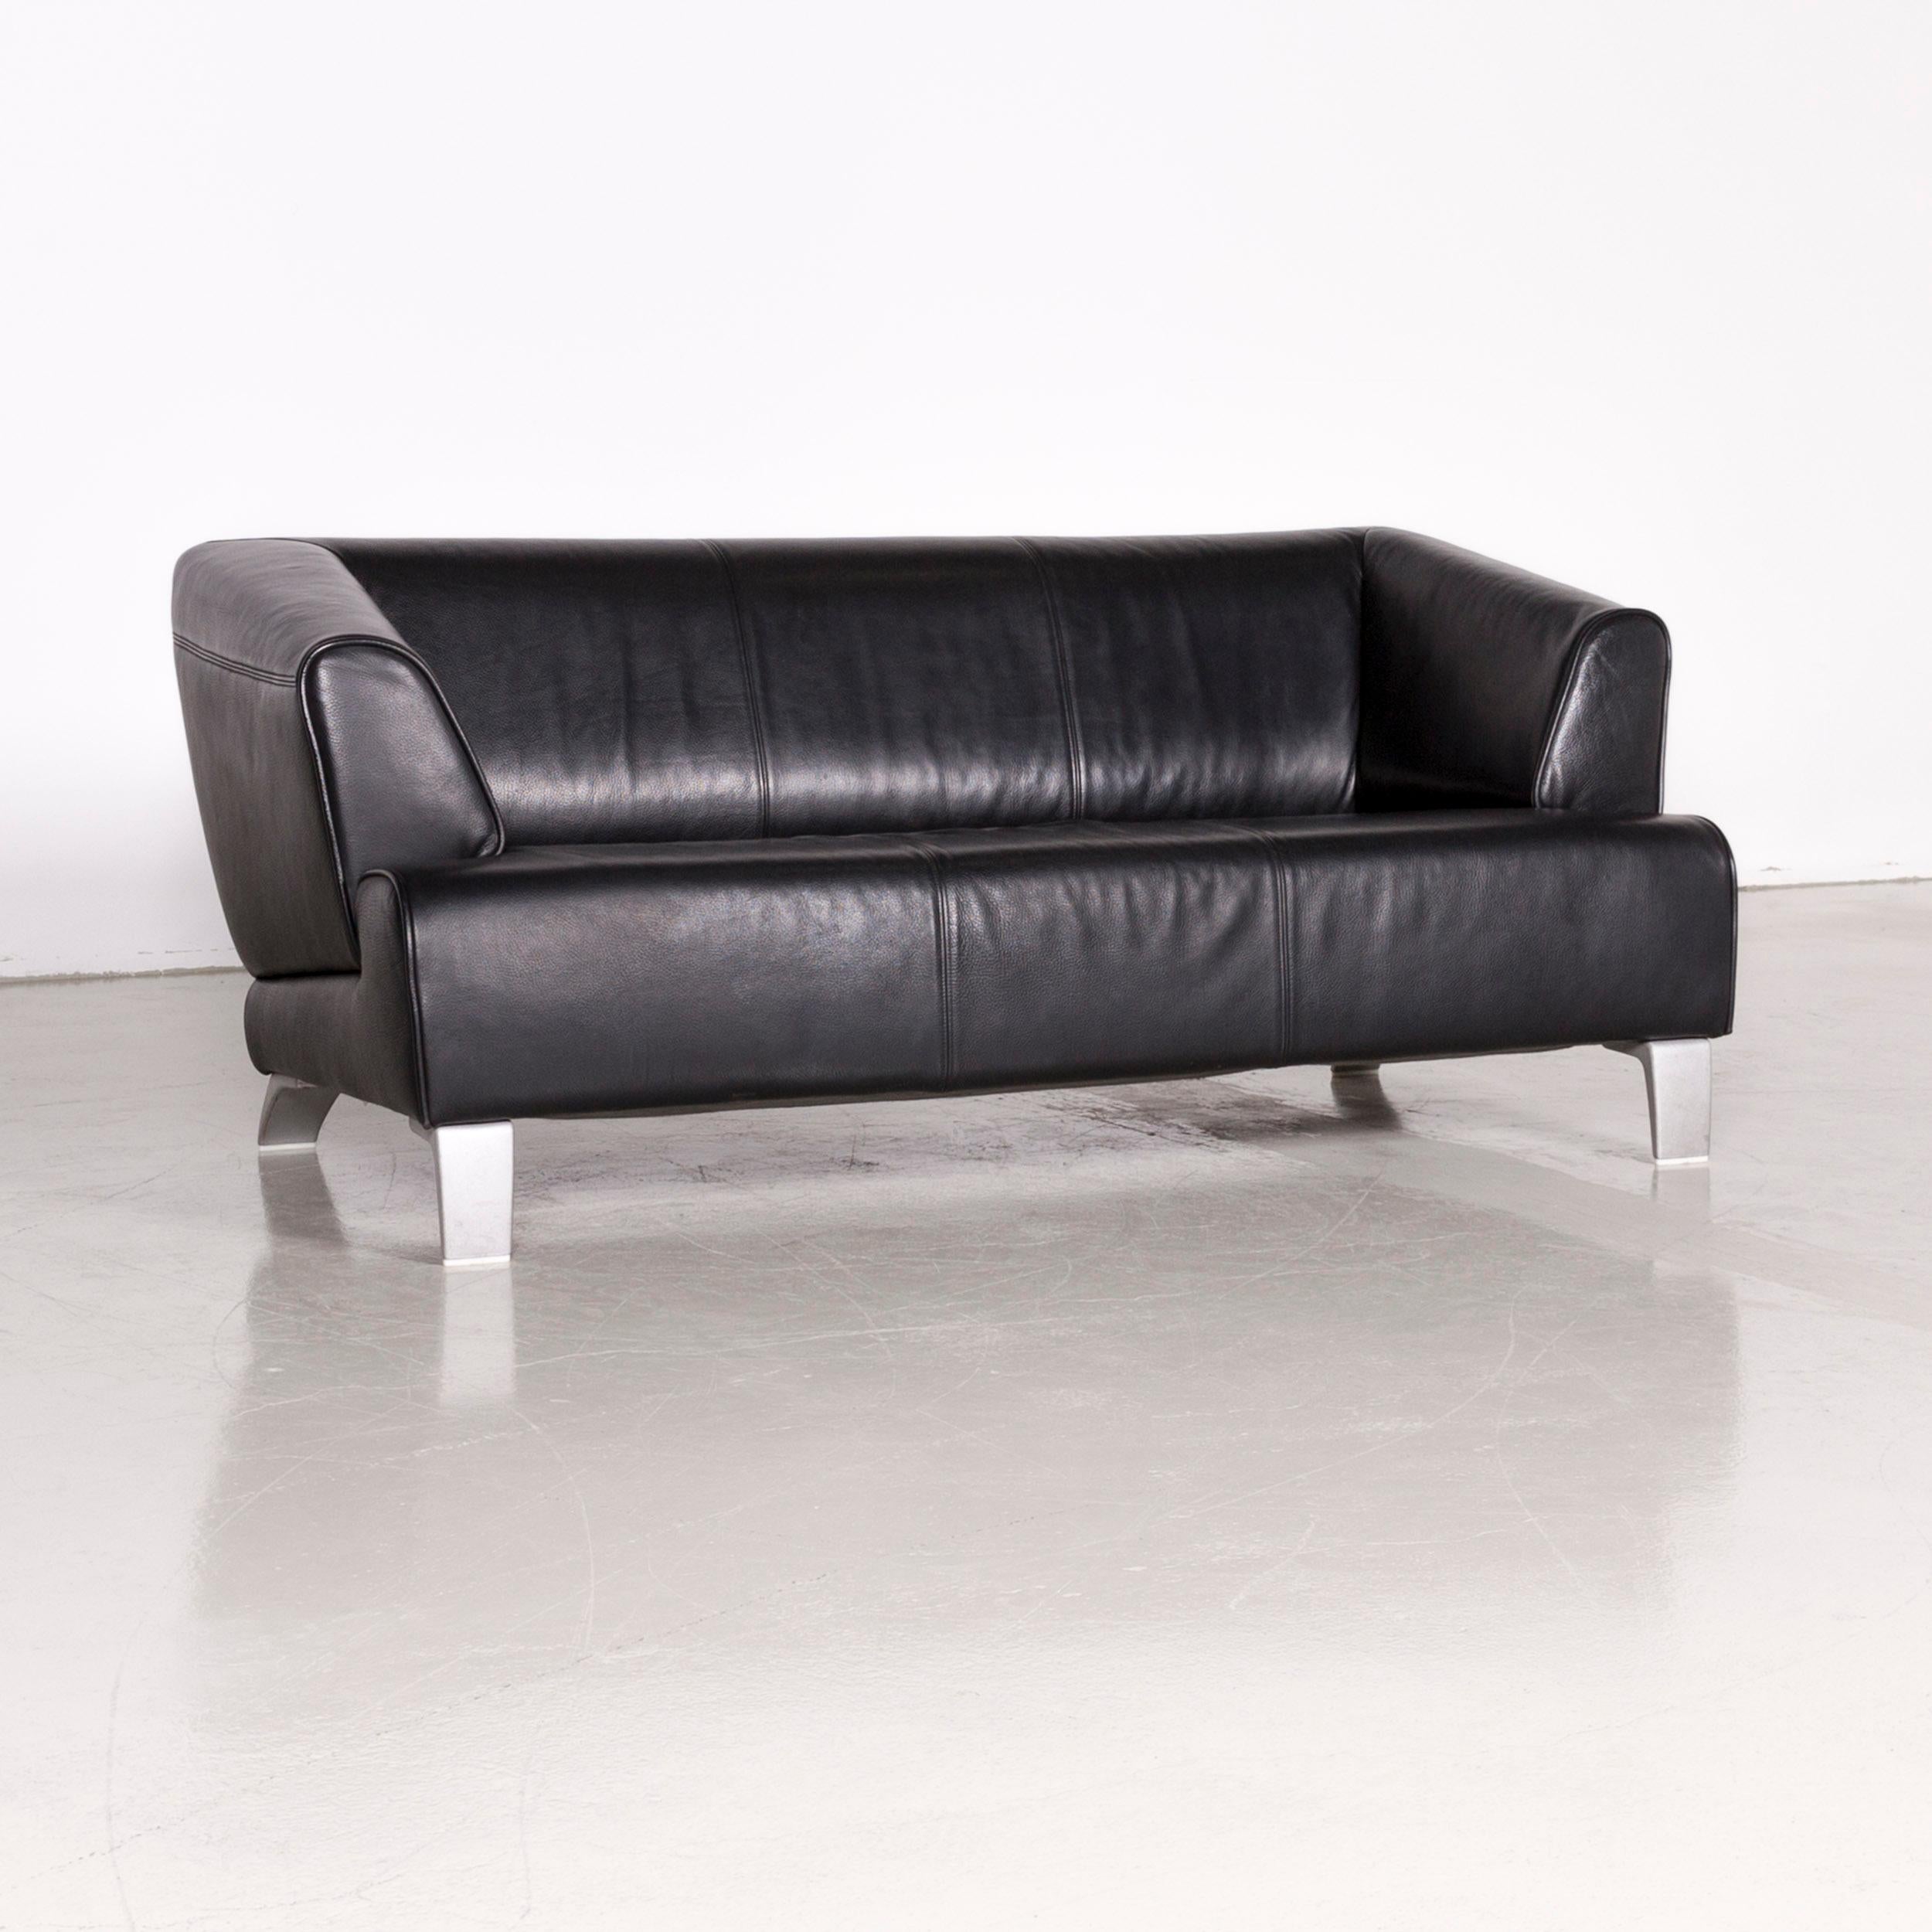 Rolf Benz 2300 designer sofa black two-seat leather couch.